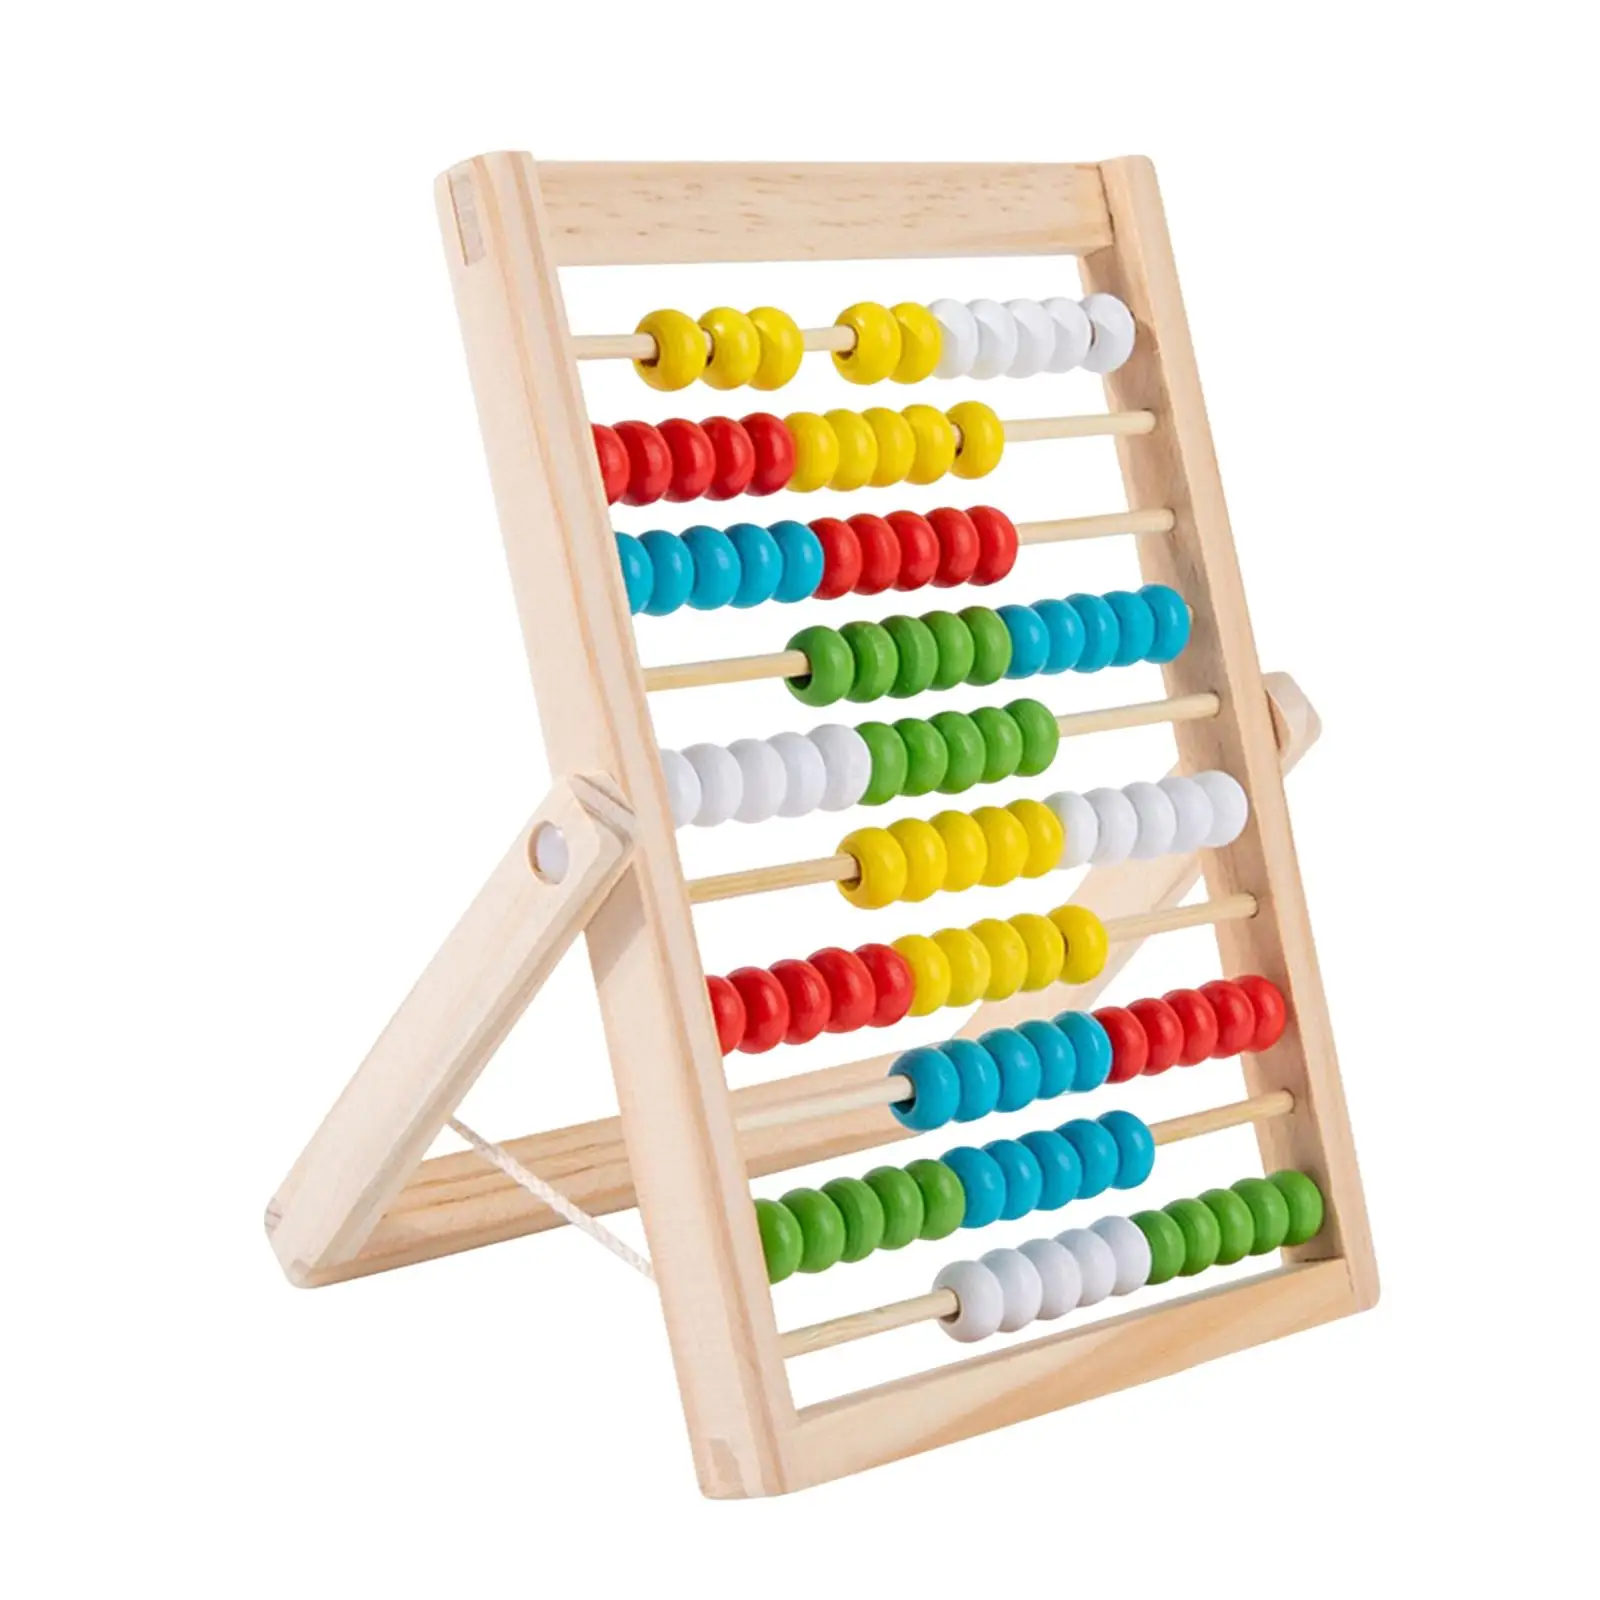 Wooden Abacus Classic Counting Kids Learning Math Addition and Subtraction 10 Rows Abacus for Children Boys Preschool Girls